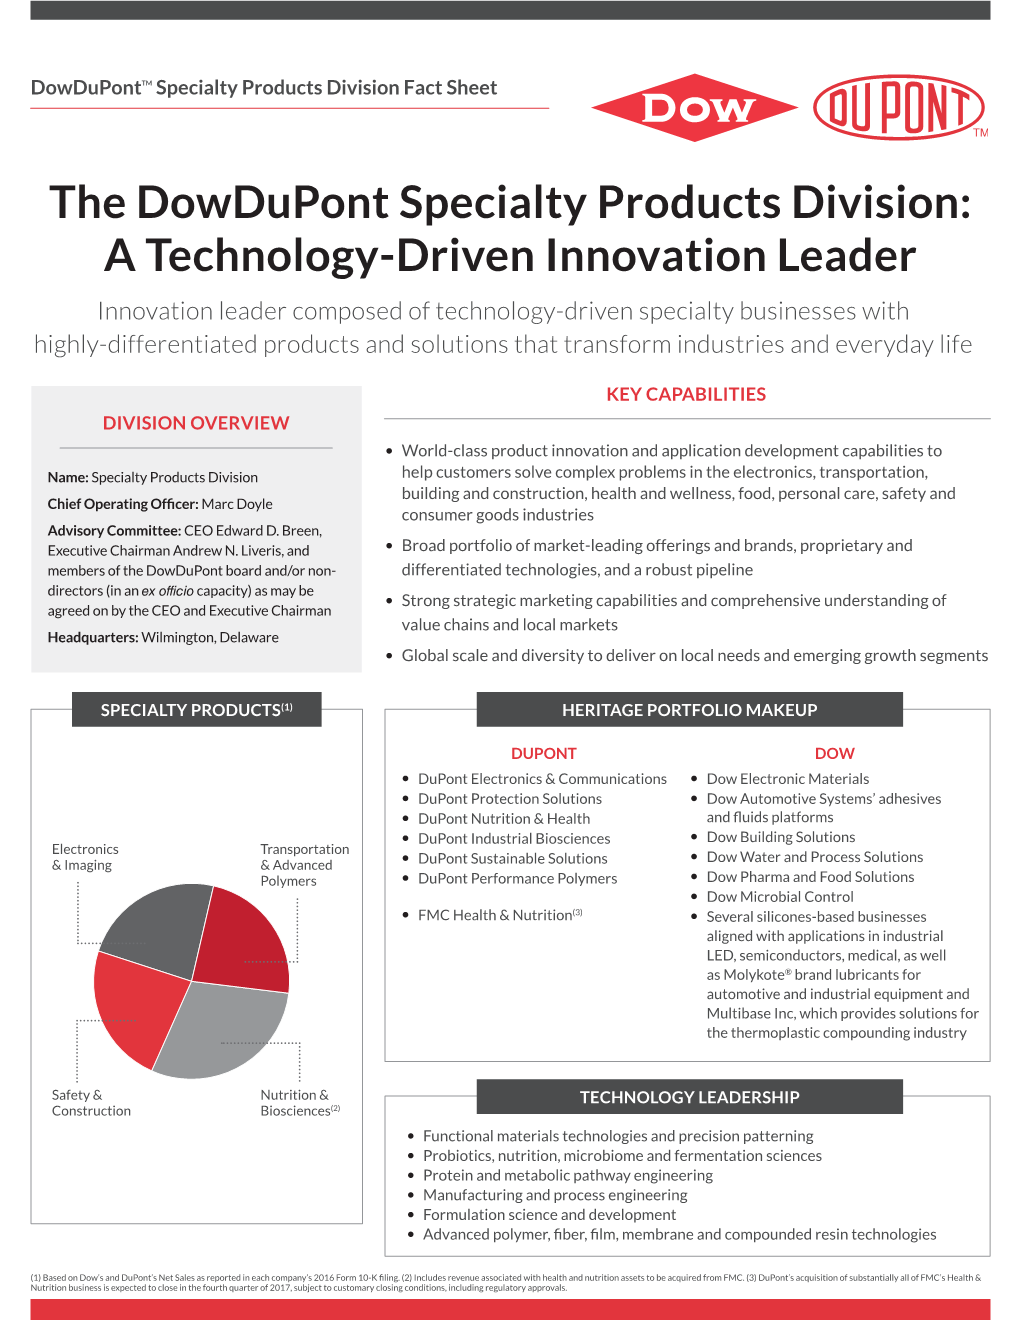 The Dowdupont Specialty Products Division: a Technology-Driven